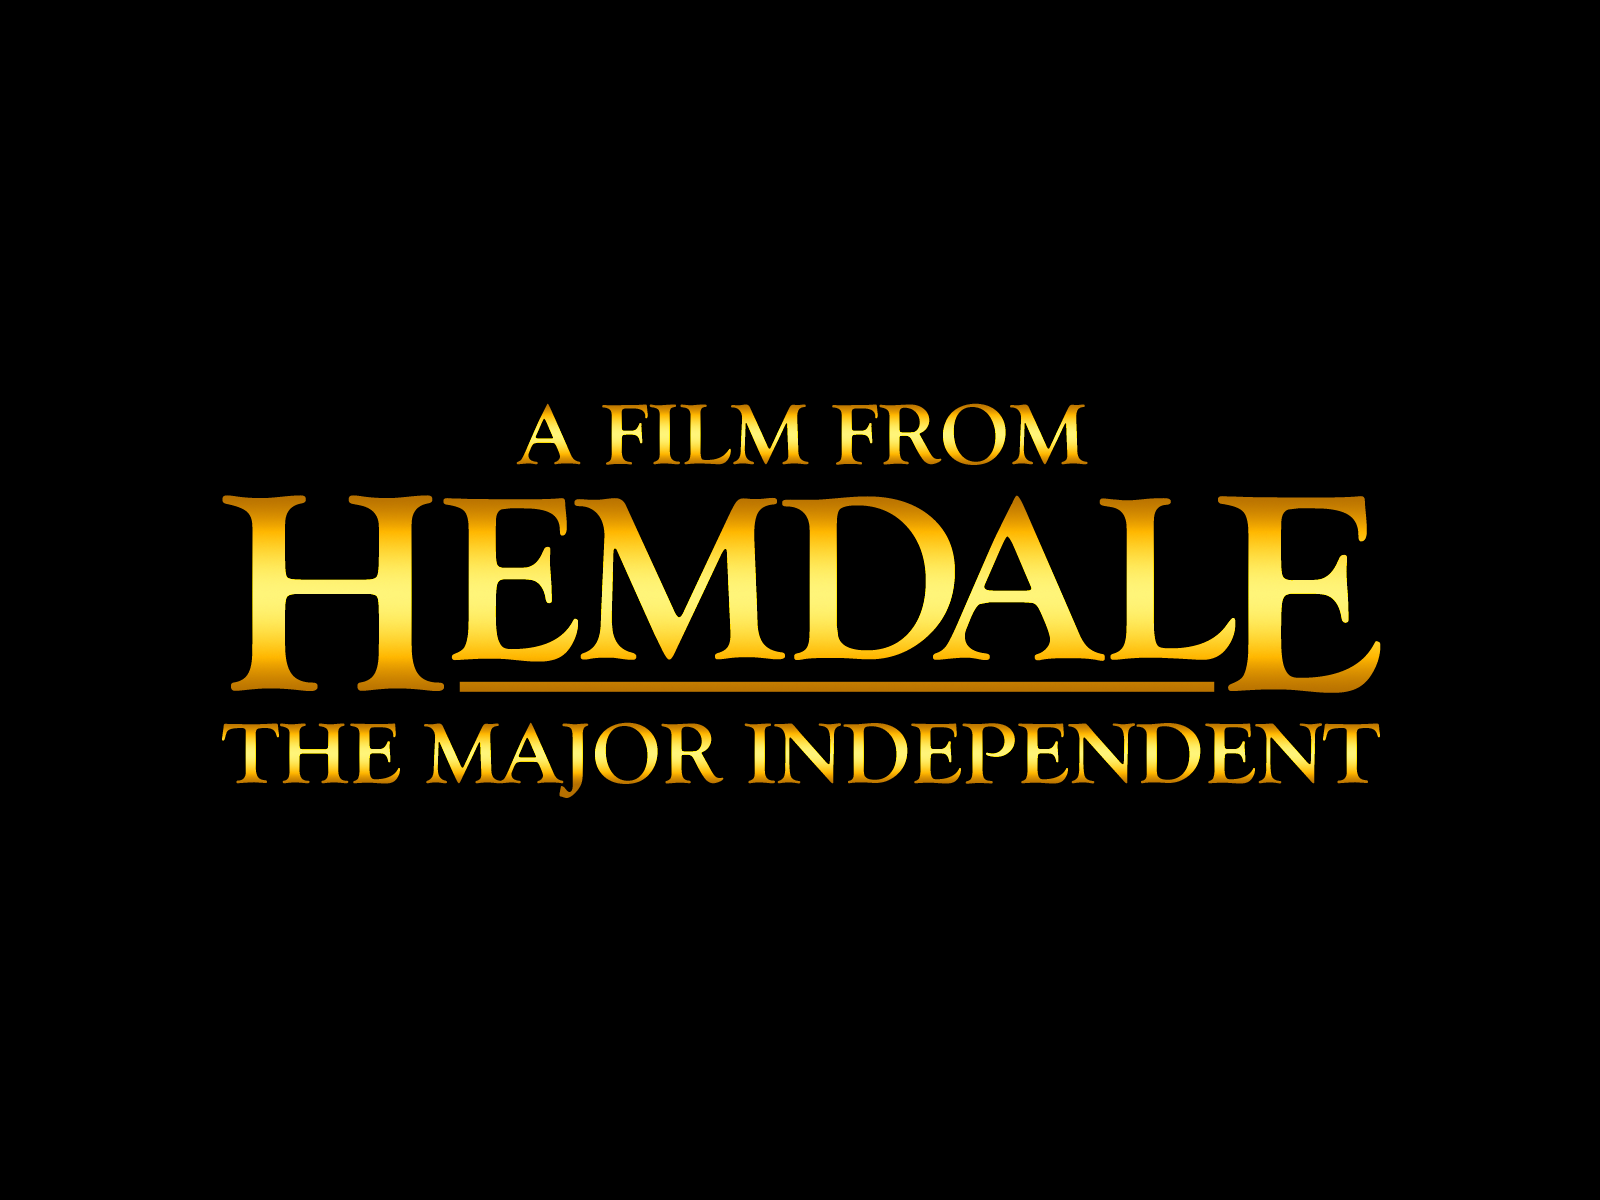 A Film From Hemdale: The Major Independent